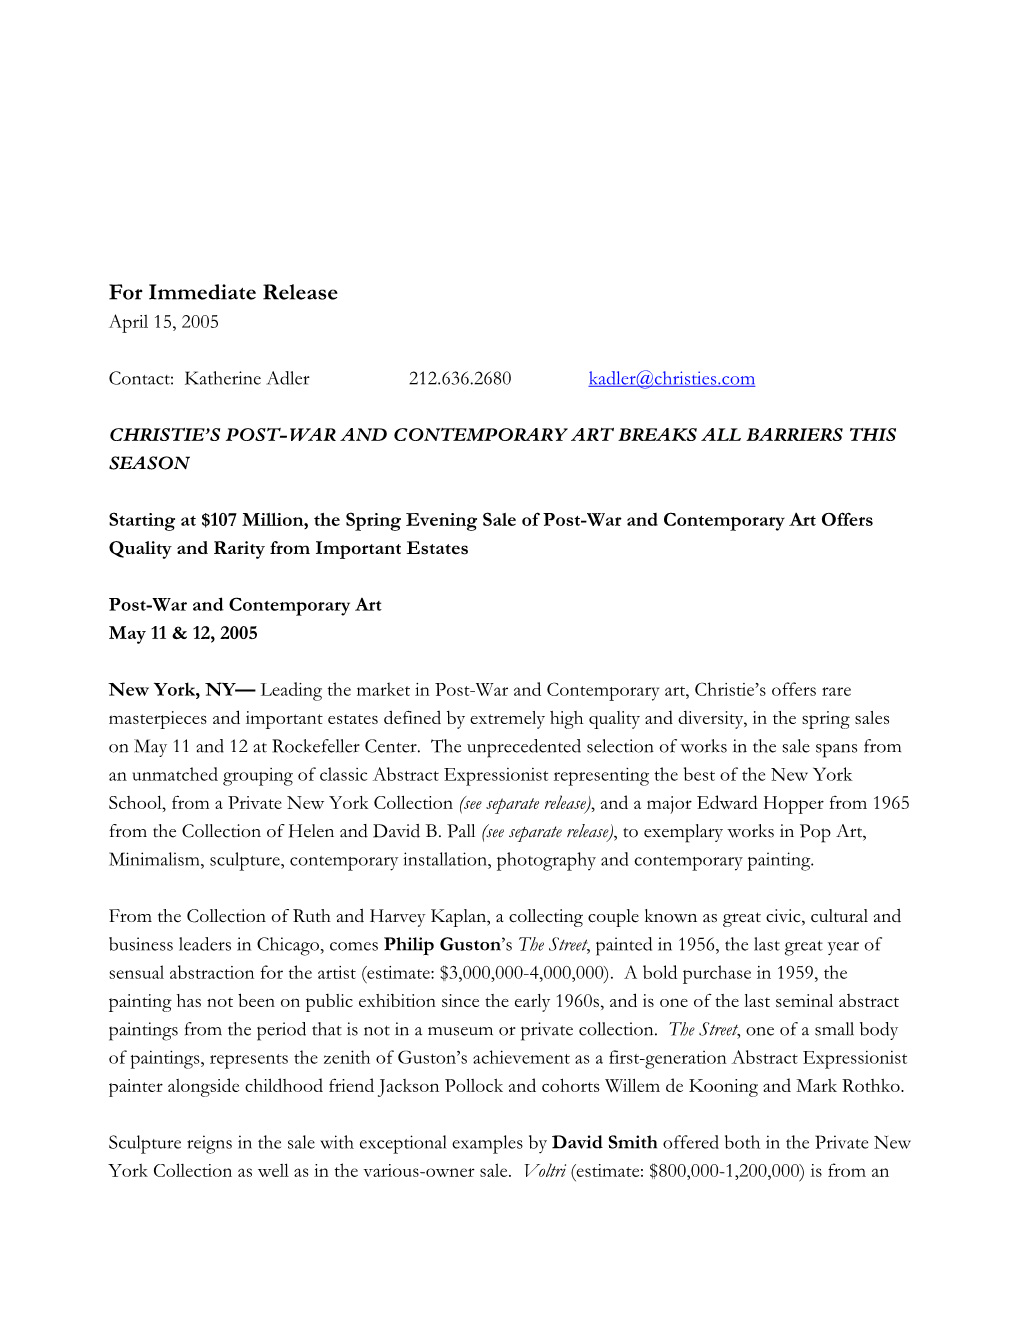 For Immediate Release April 15, 2005